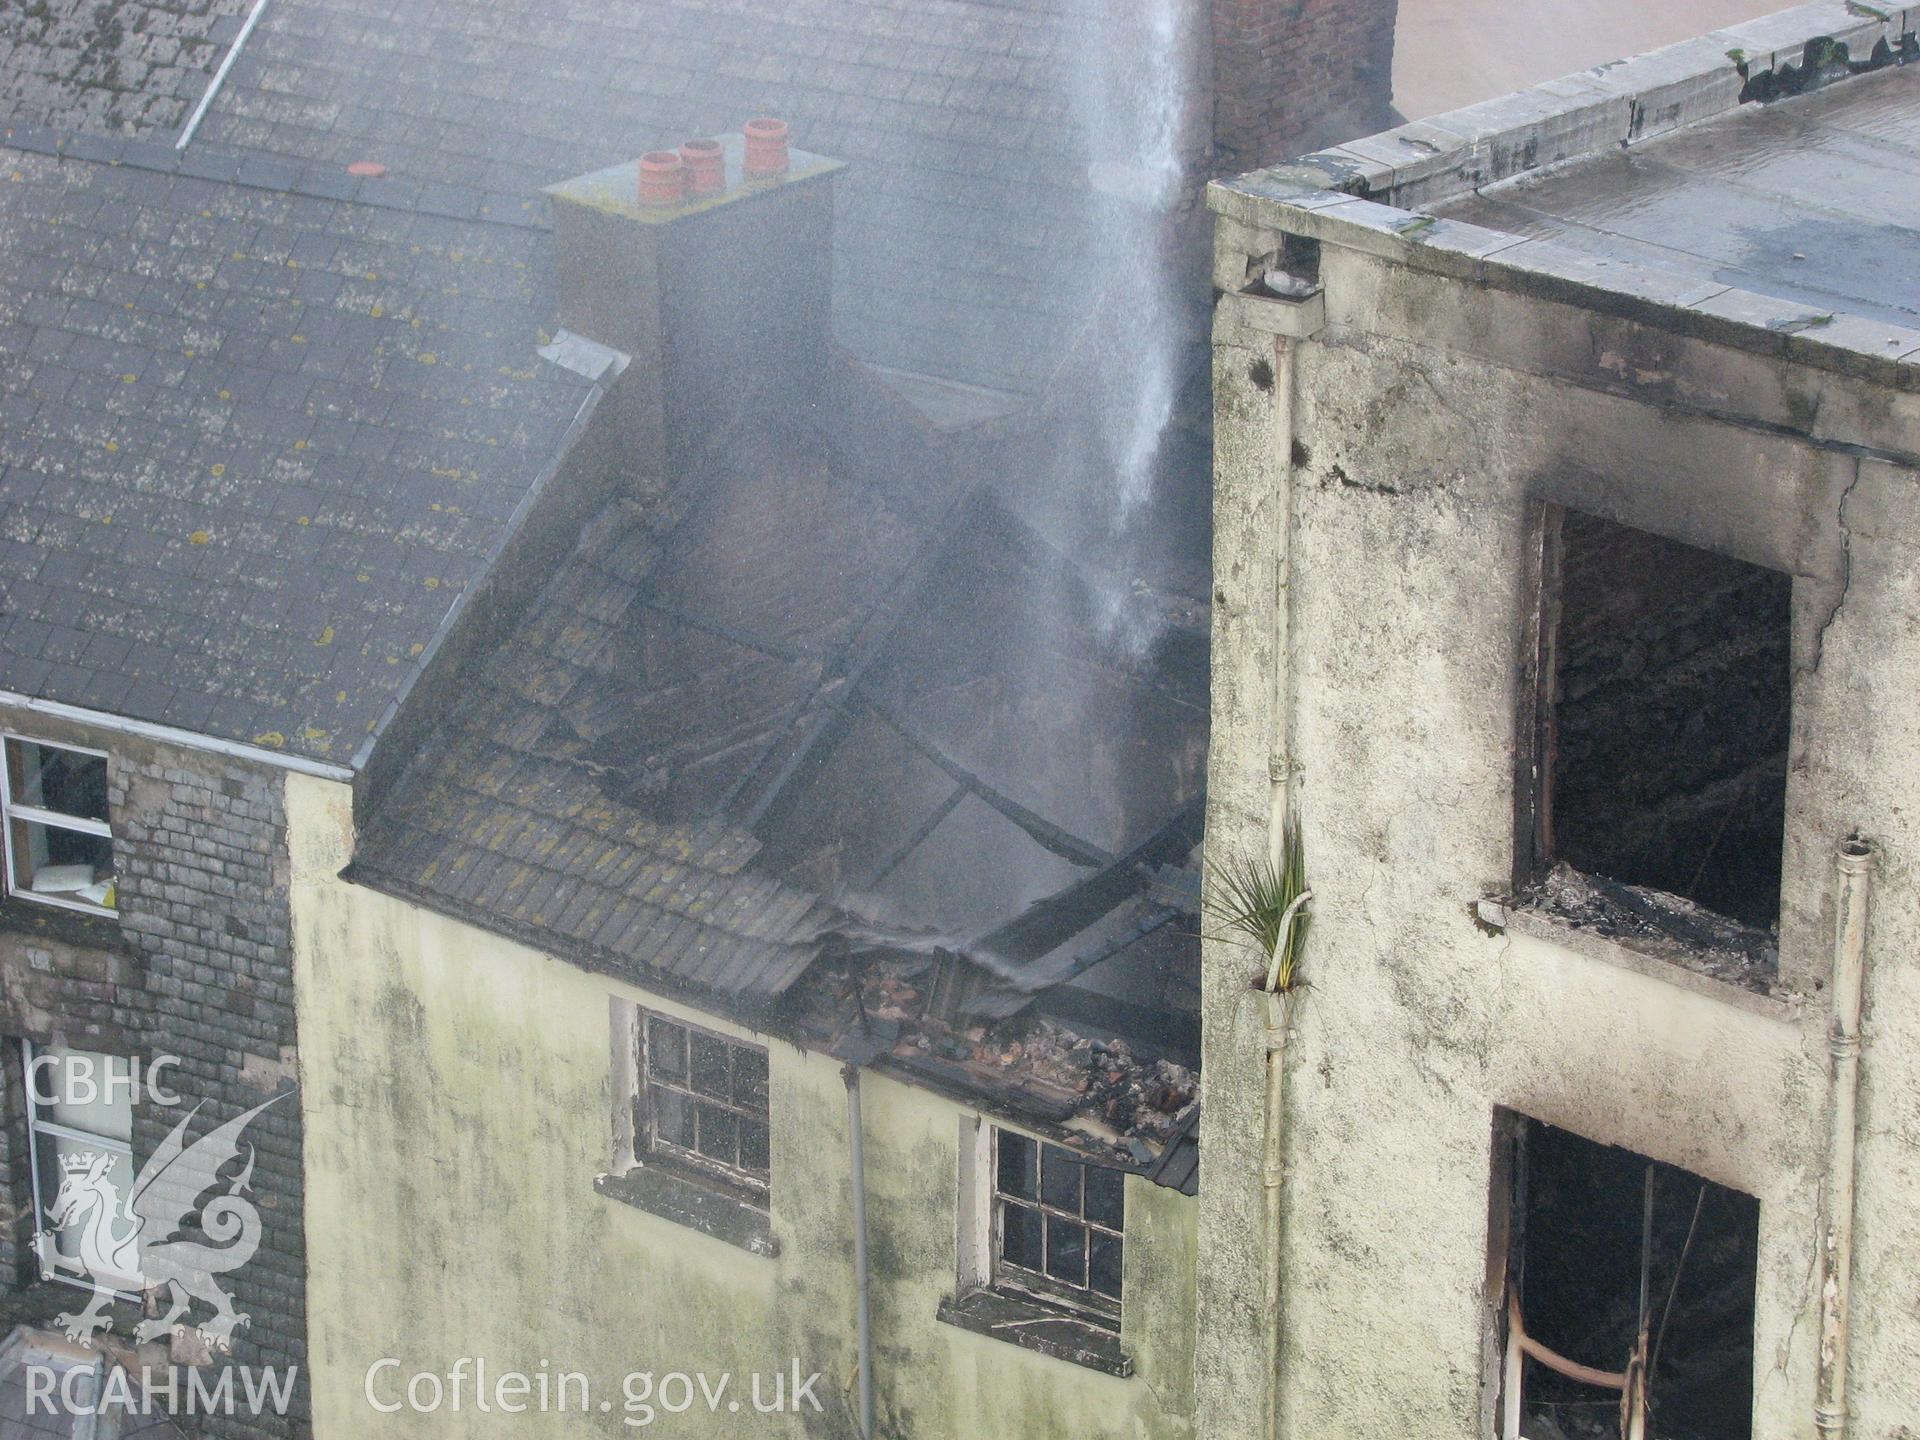 Colour digital photograph showing the damage caused by fire to the exterior of the Royal Gatehouse Hotel.